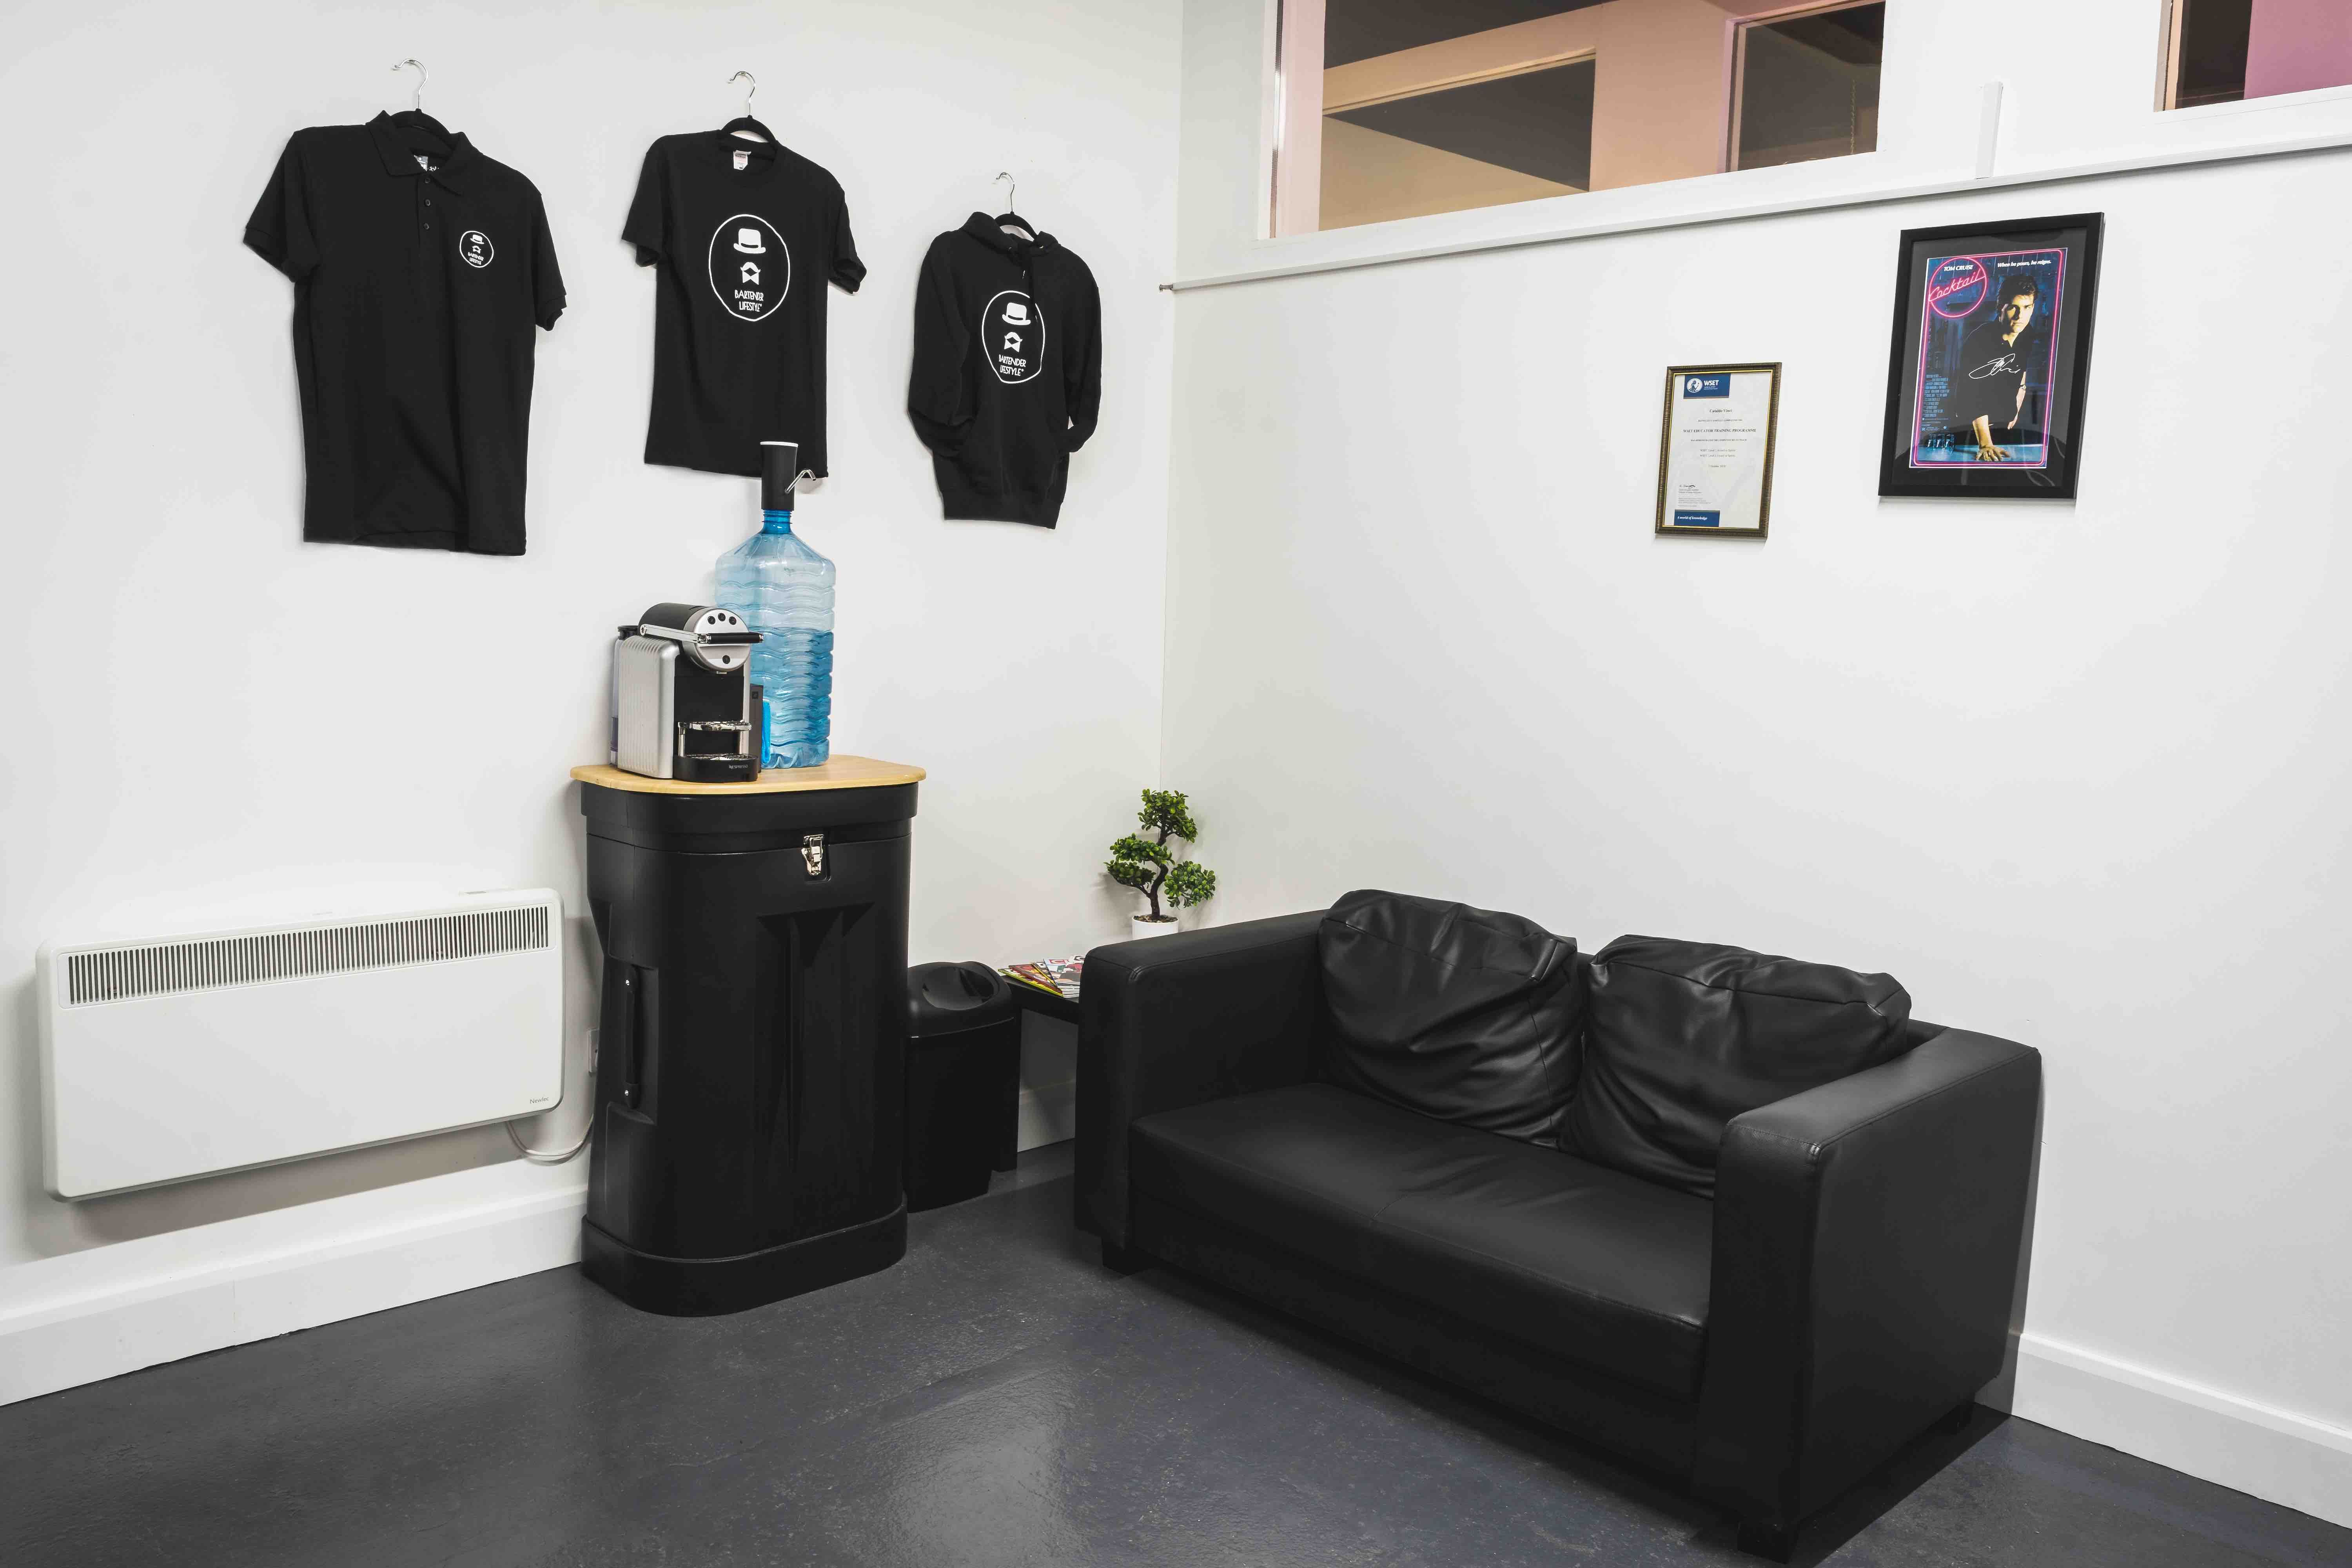 students chilling area and our merchandise on the wall